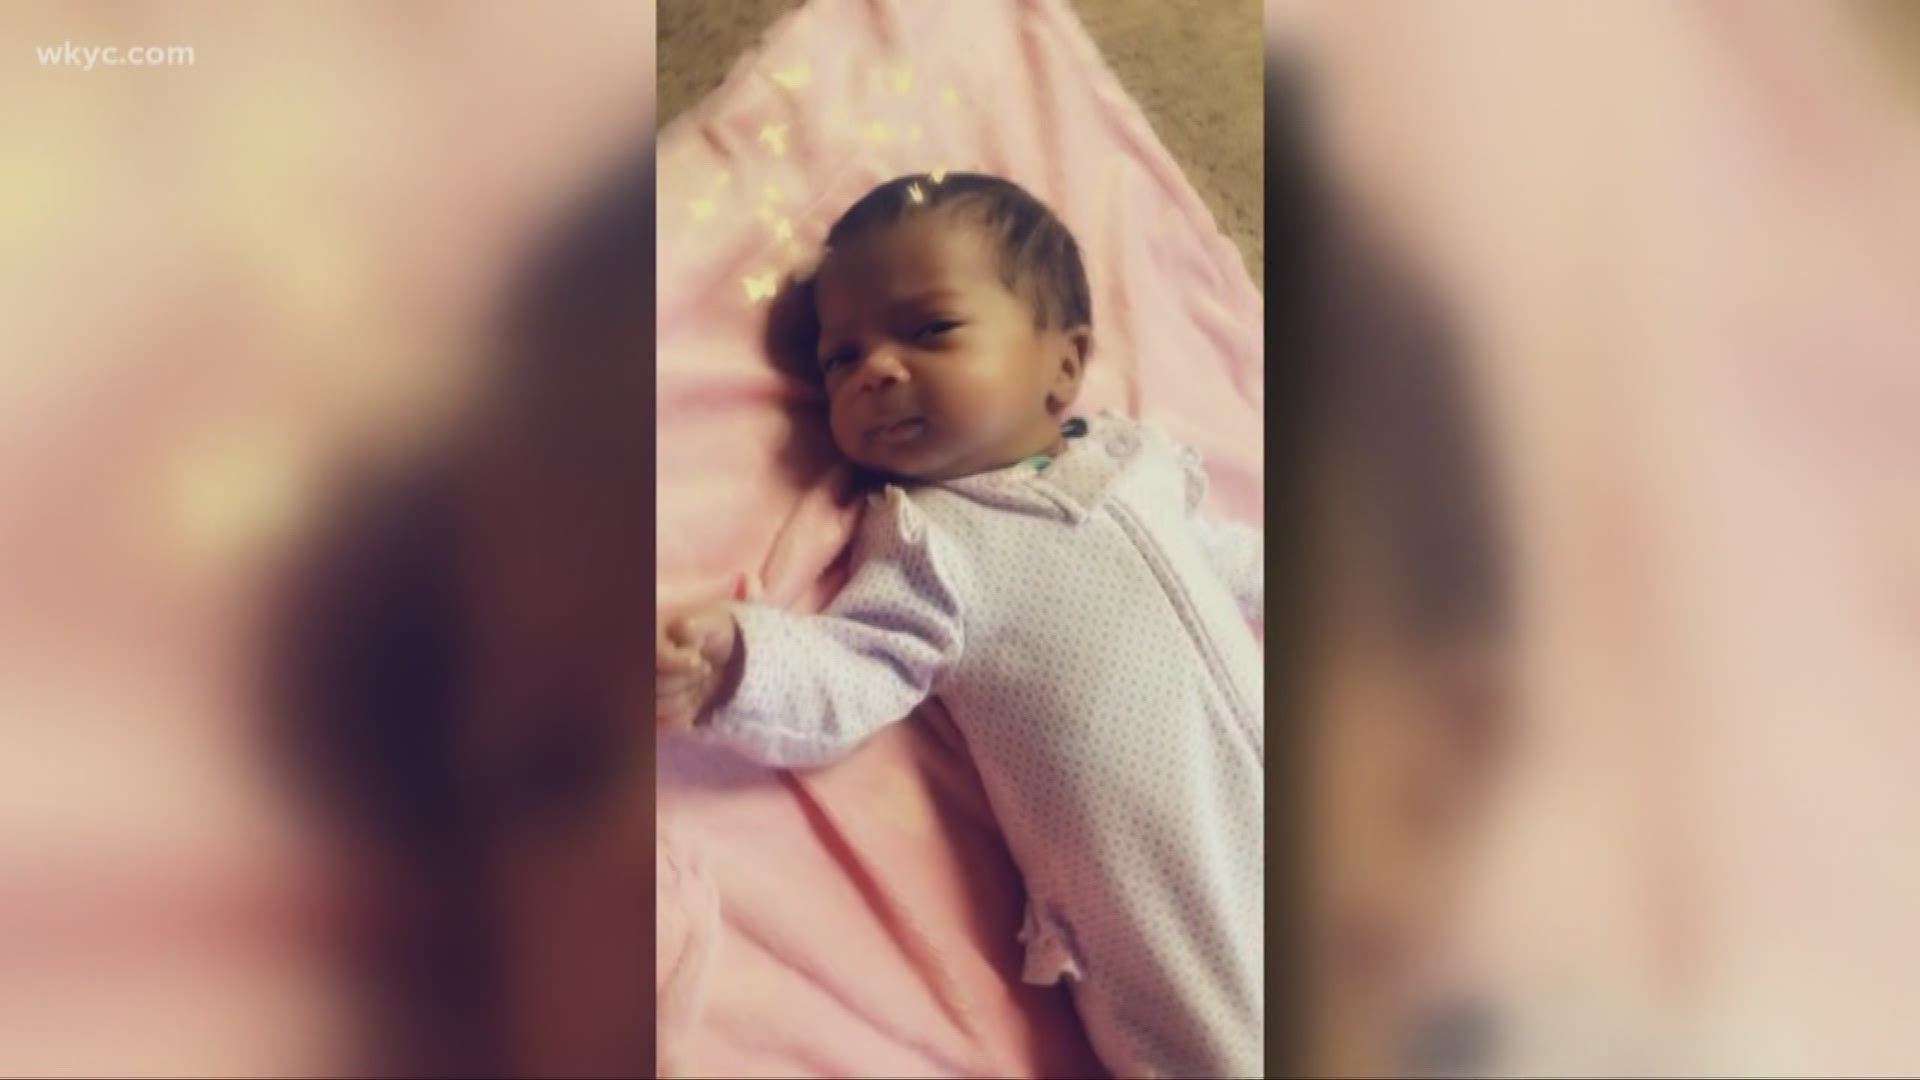 A local mother took her infant to daycare this week, and when she went to pick her up, she was dead.